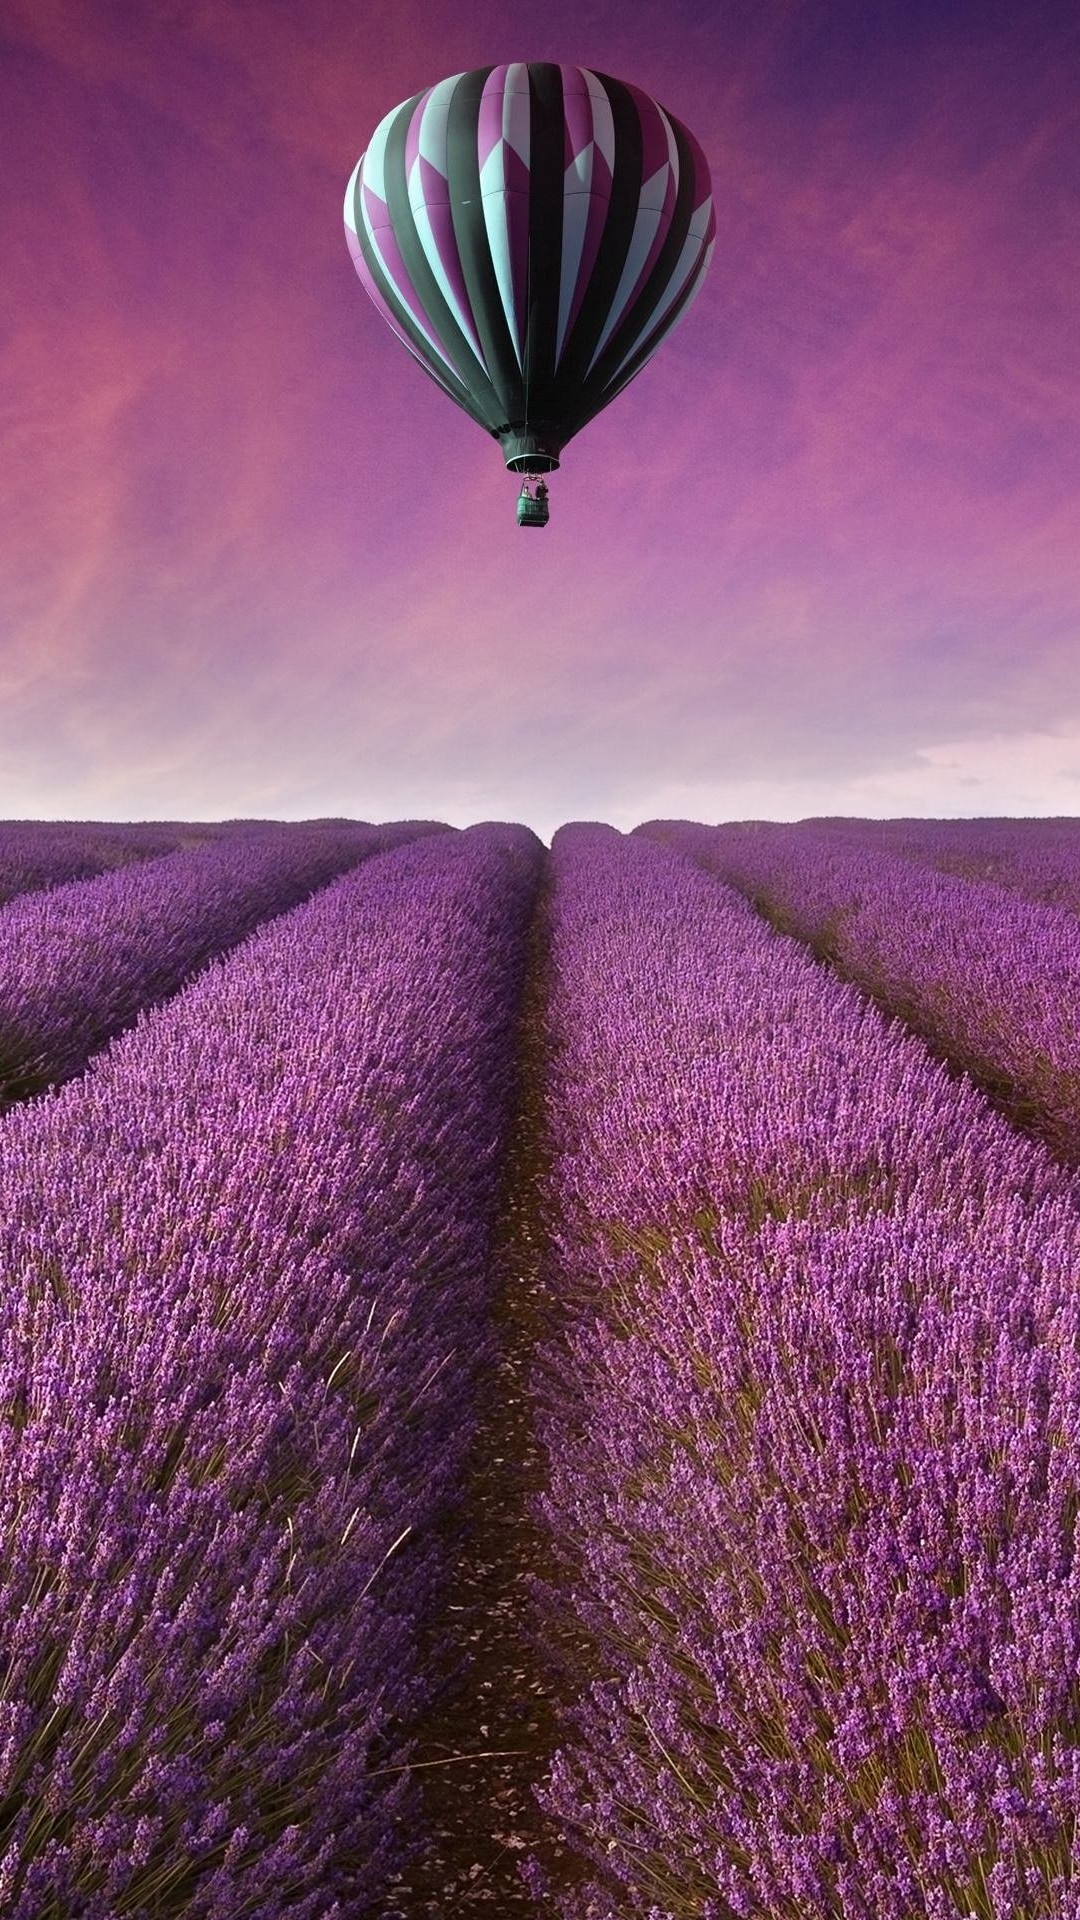 Hot Air Balloon Over Lavender Field Wallpaper for HTC One